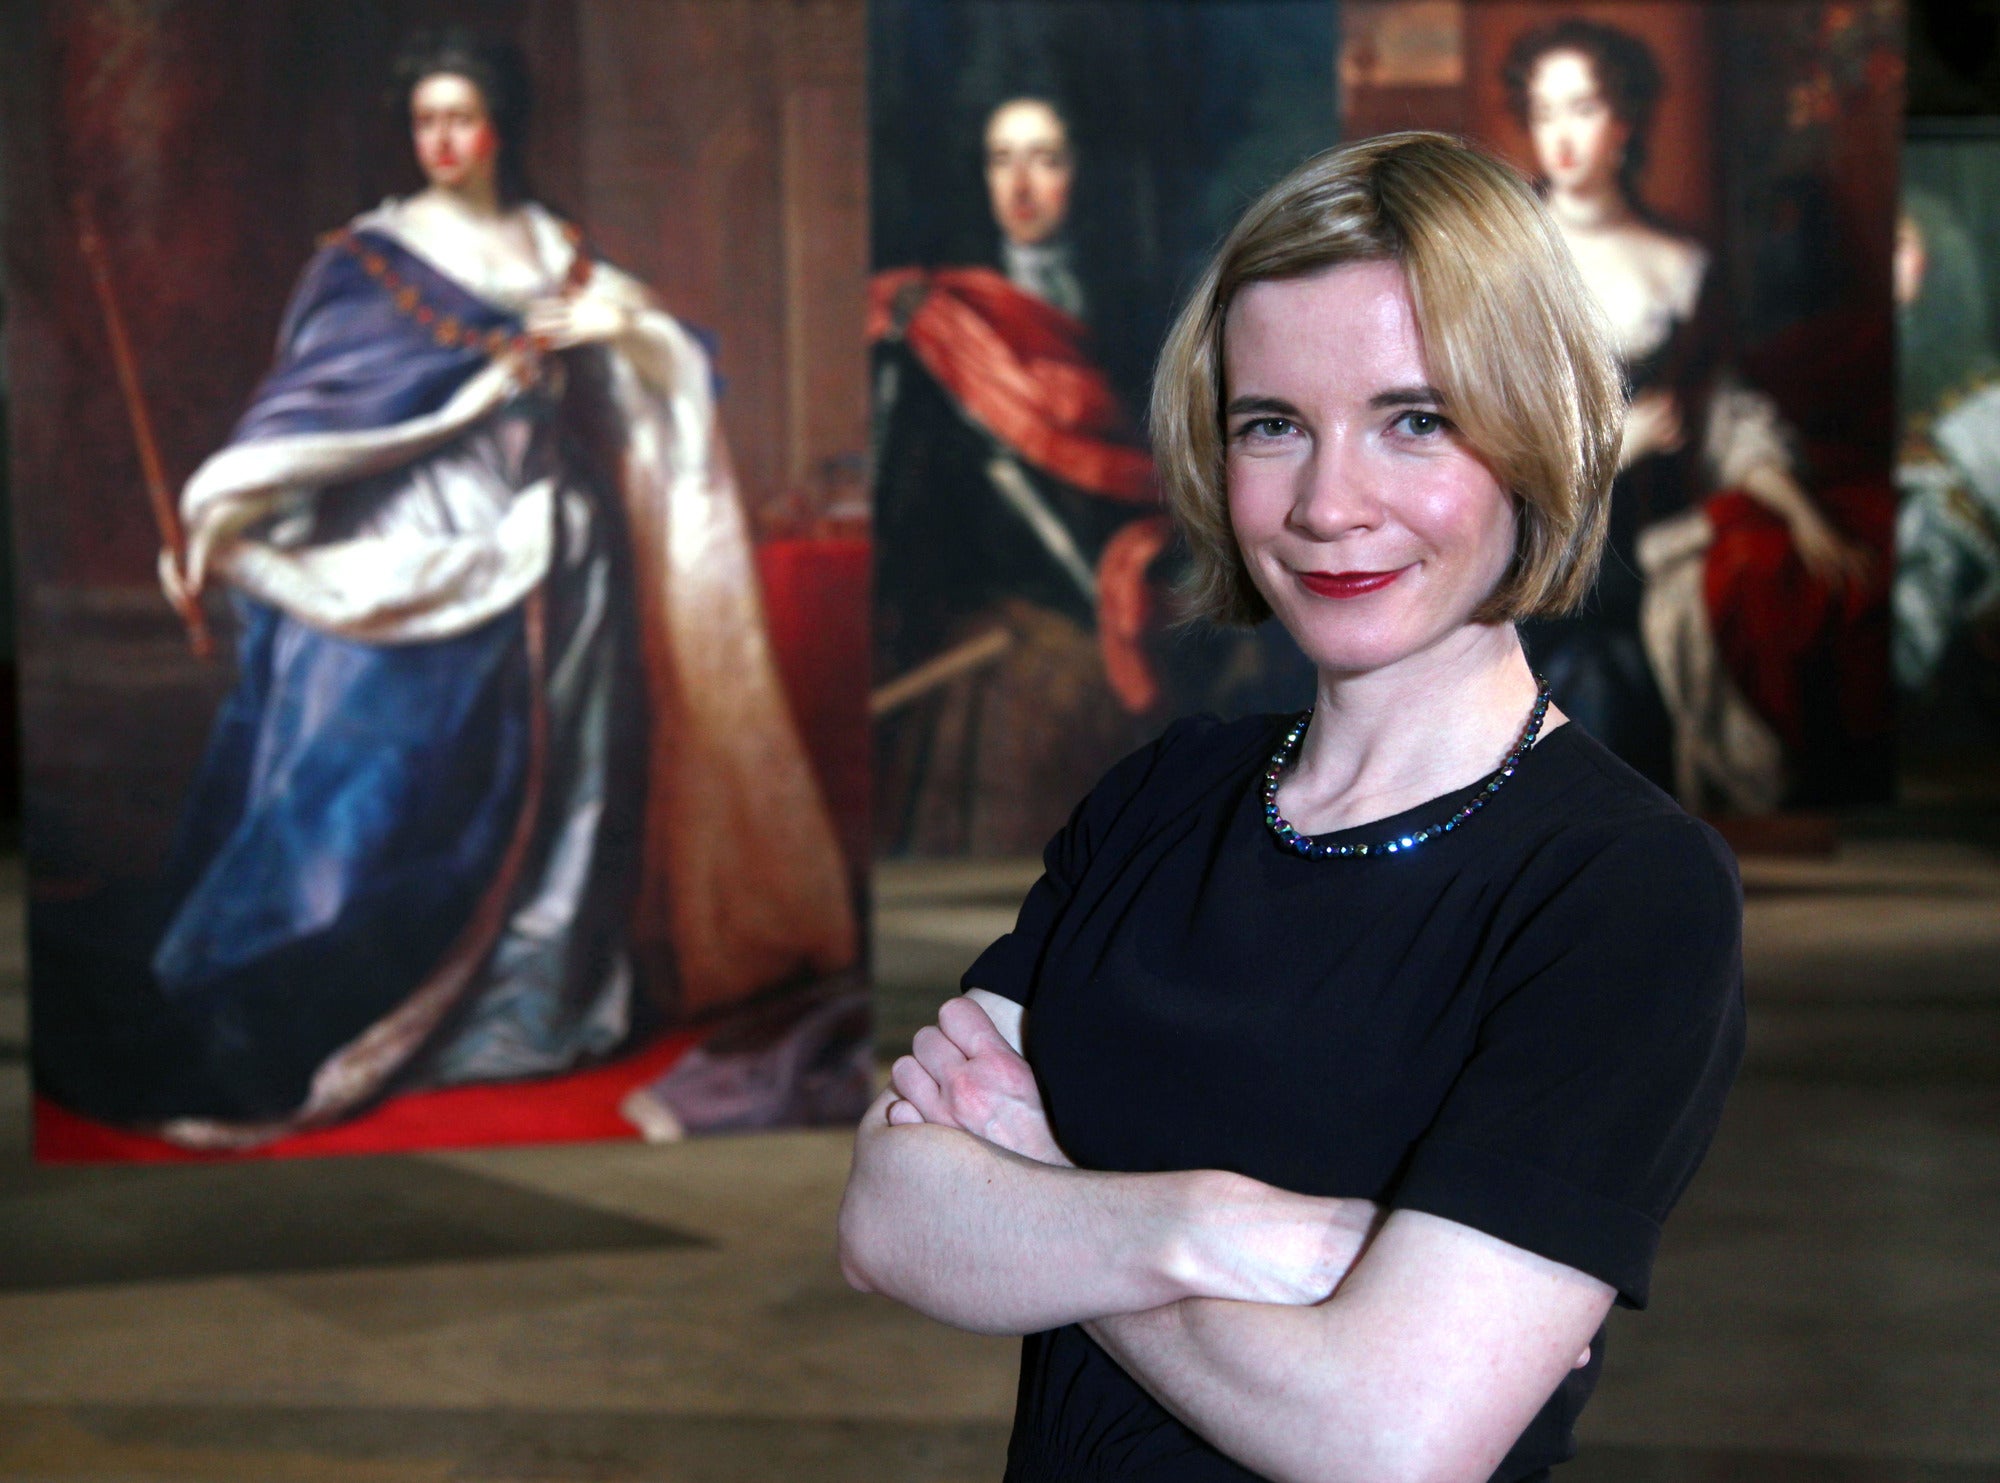 Fit To Rule: How Royal Illness Changed History presented by Lucy Worsley